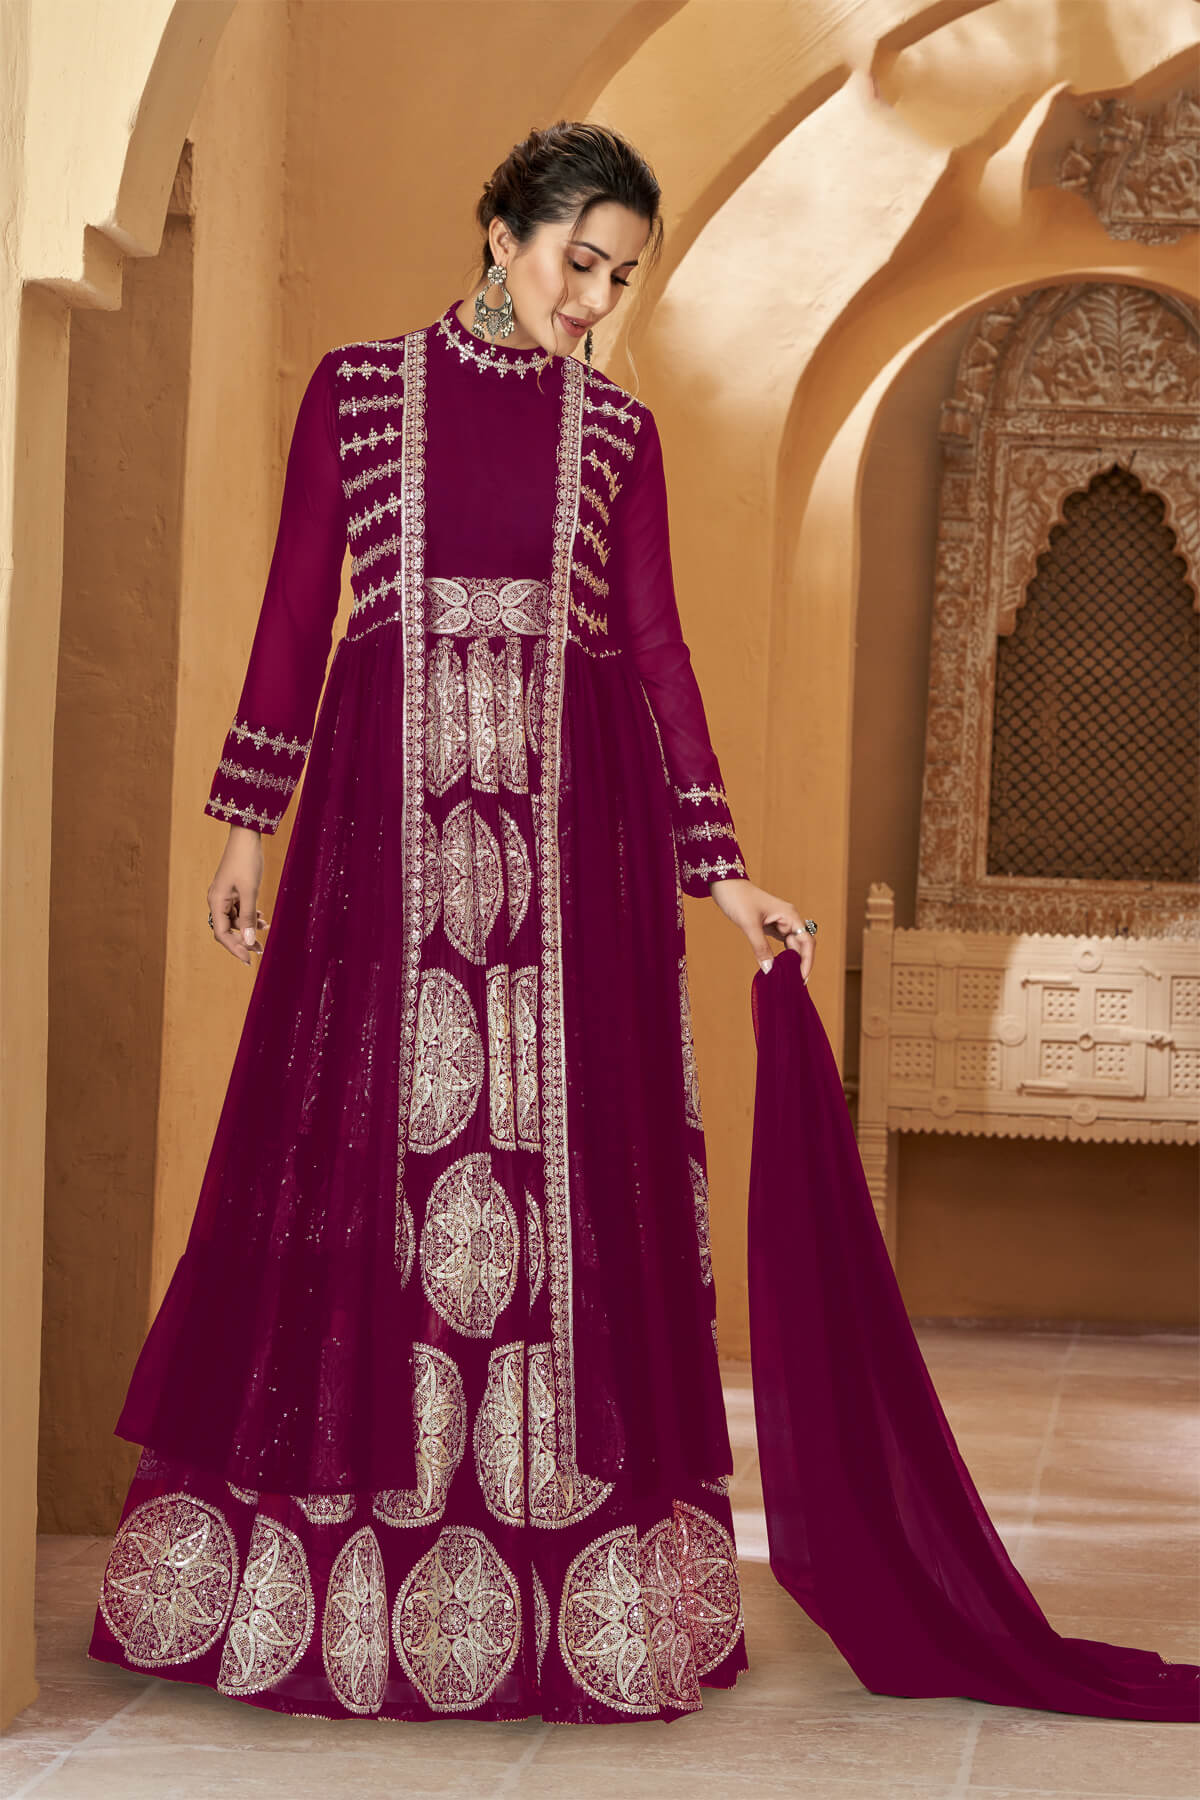 Floor Touch Anarkali Gown with Jacket Style online in Canada USA UK Australia New Zealand France Mauritius